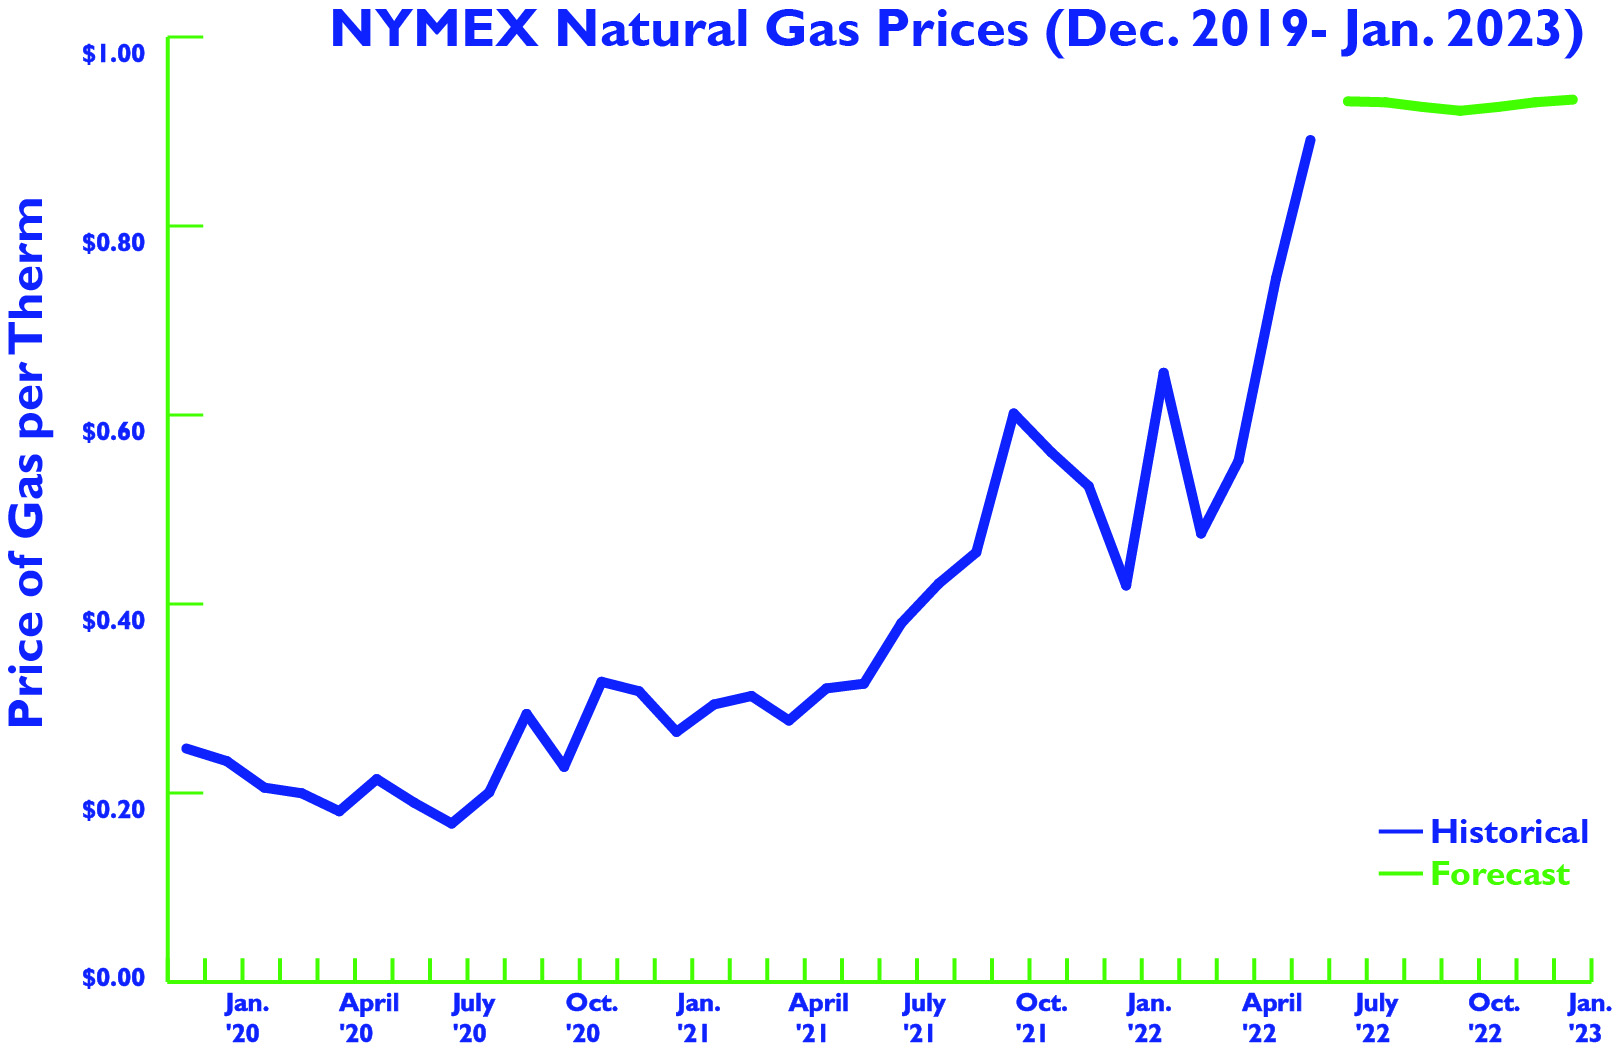 A graph showing the NYMEX price of natural gas from December 2019at just above 20 cents a therm, and rising through June 2022 to 80 cents a therm, and the future price of gas through January 2023 at around 85 cents a therm.